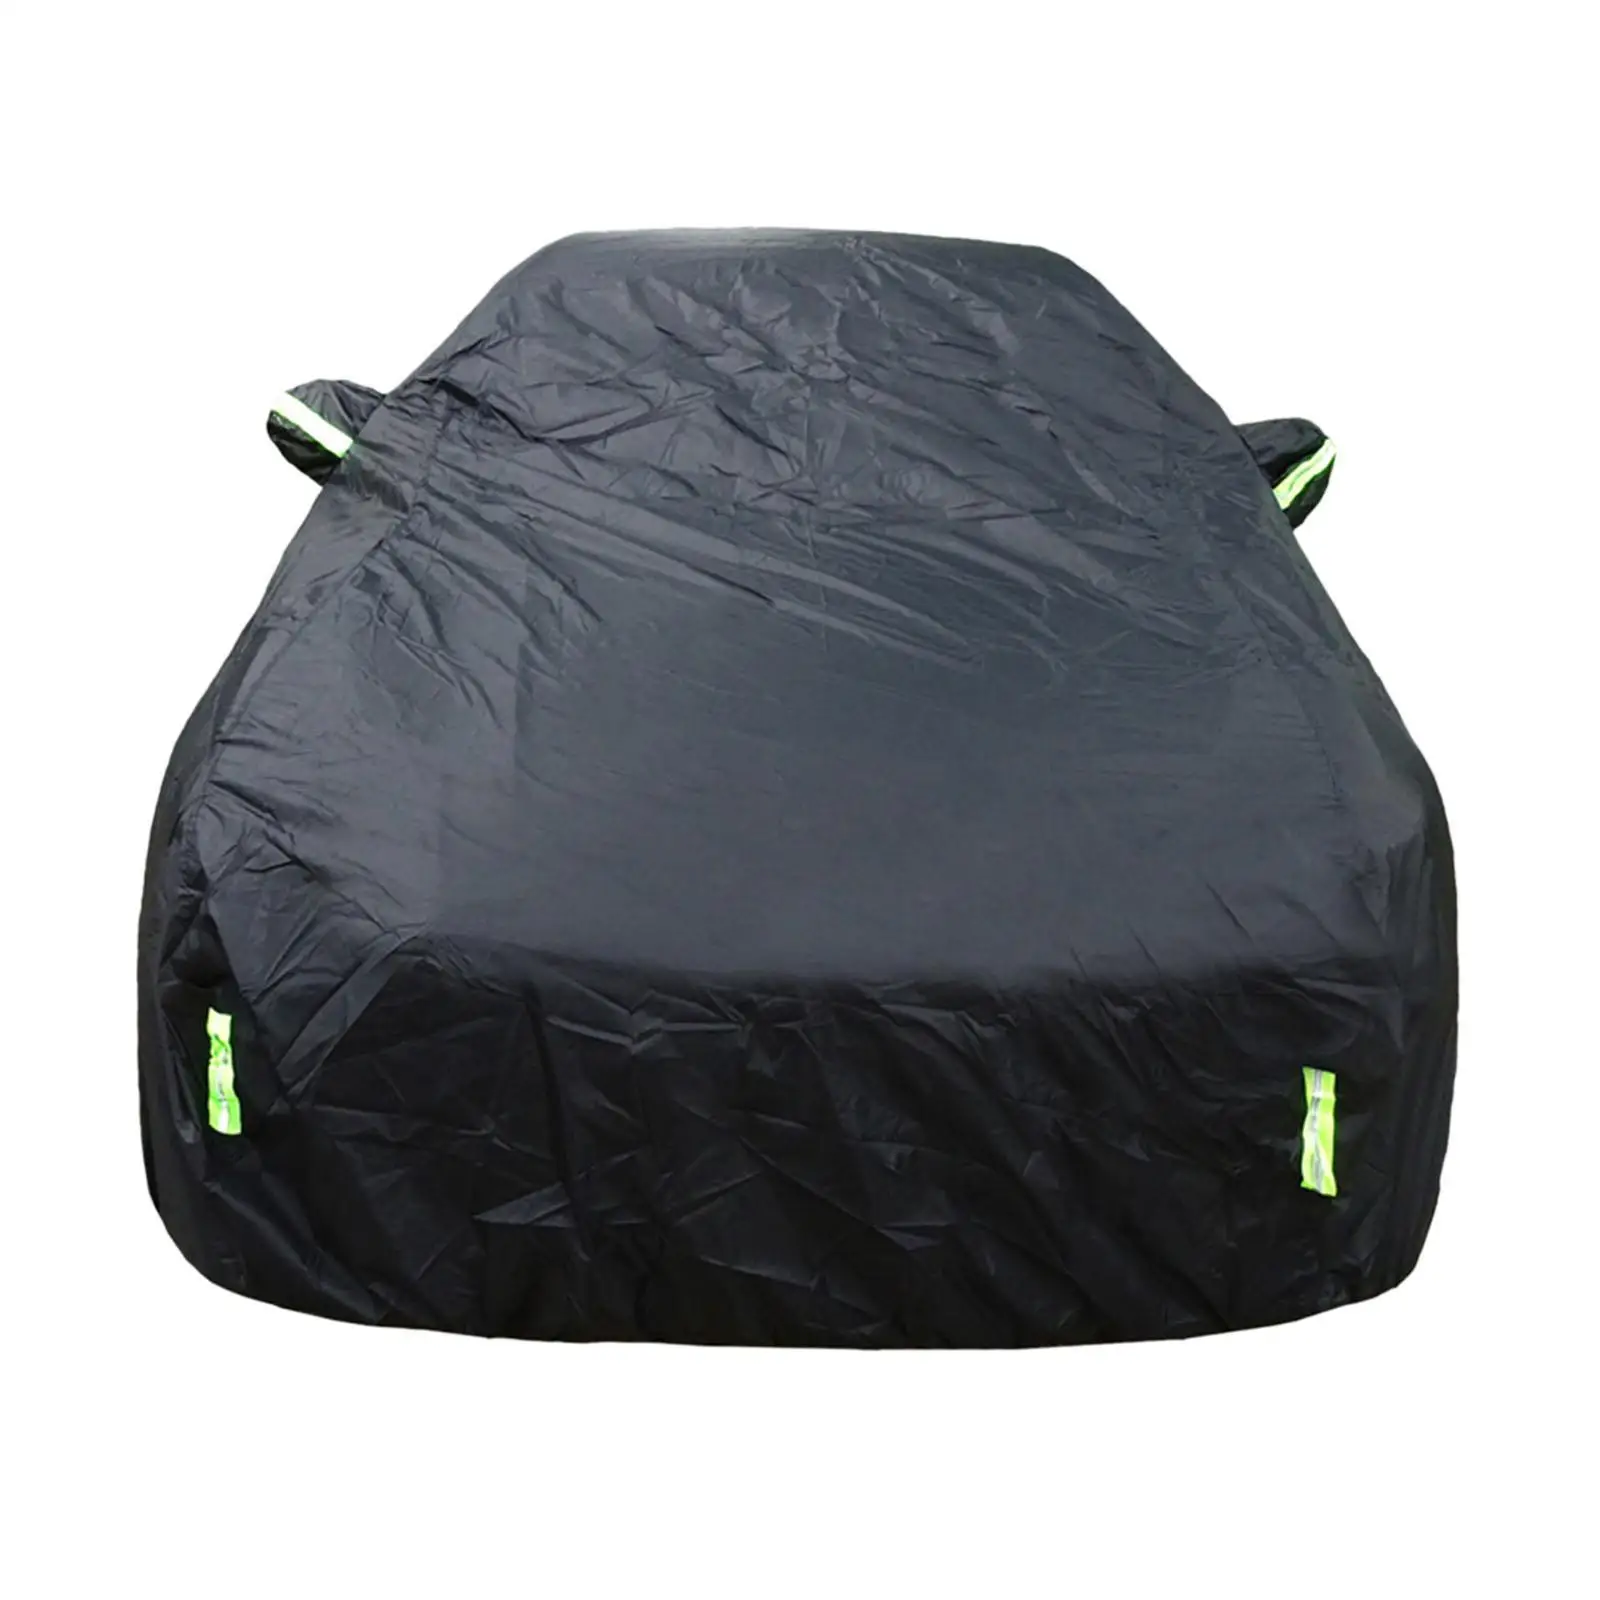 Full Exterior Covers Protection Vehicle for Automobiles Trucks Sedan - £32.51 GBP+